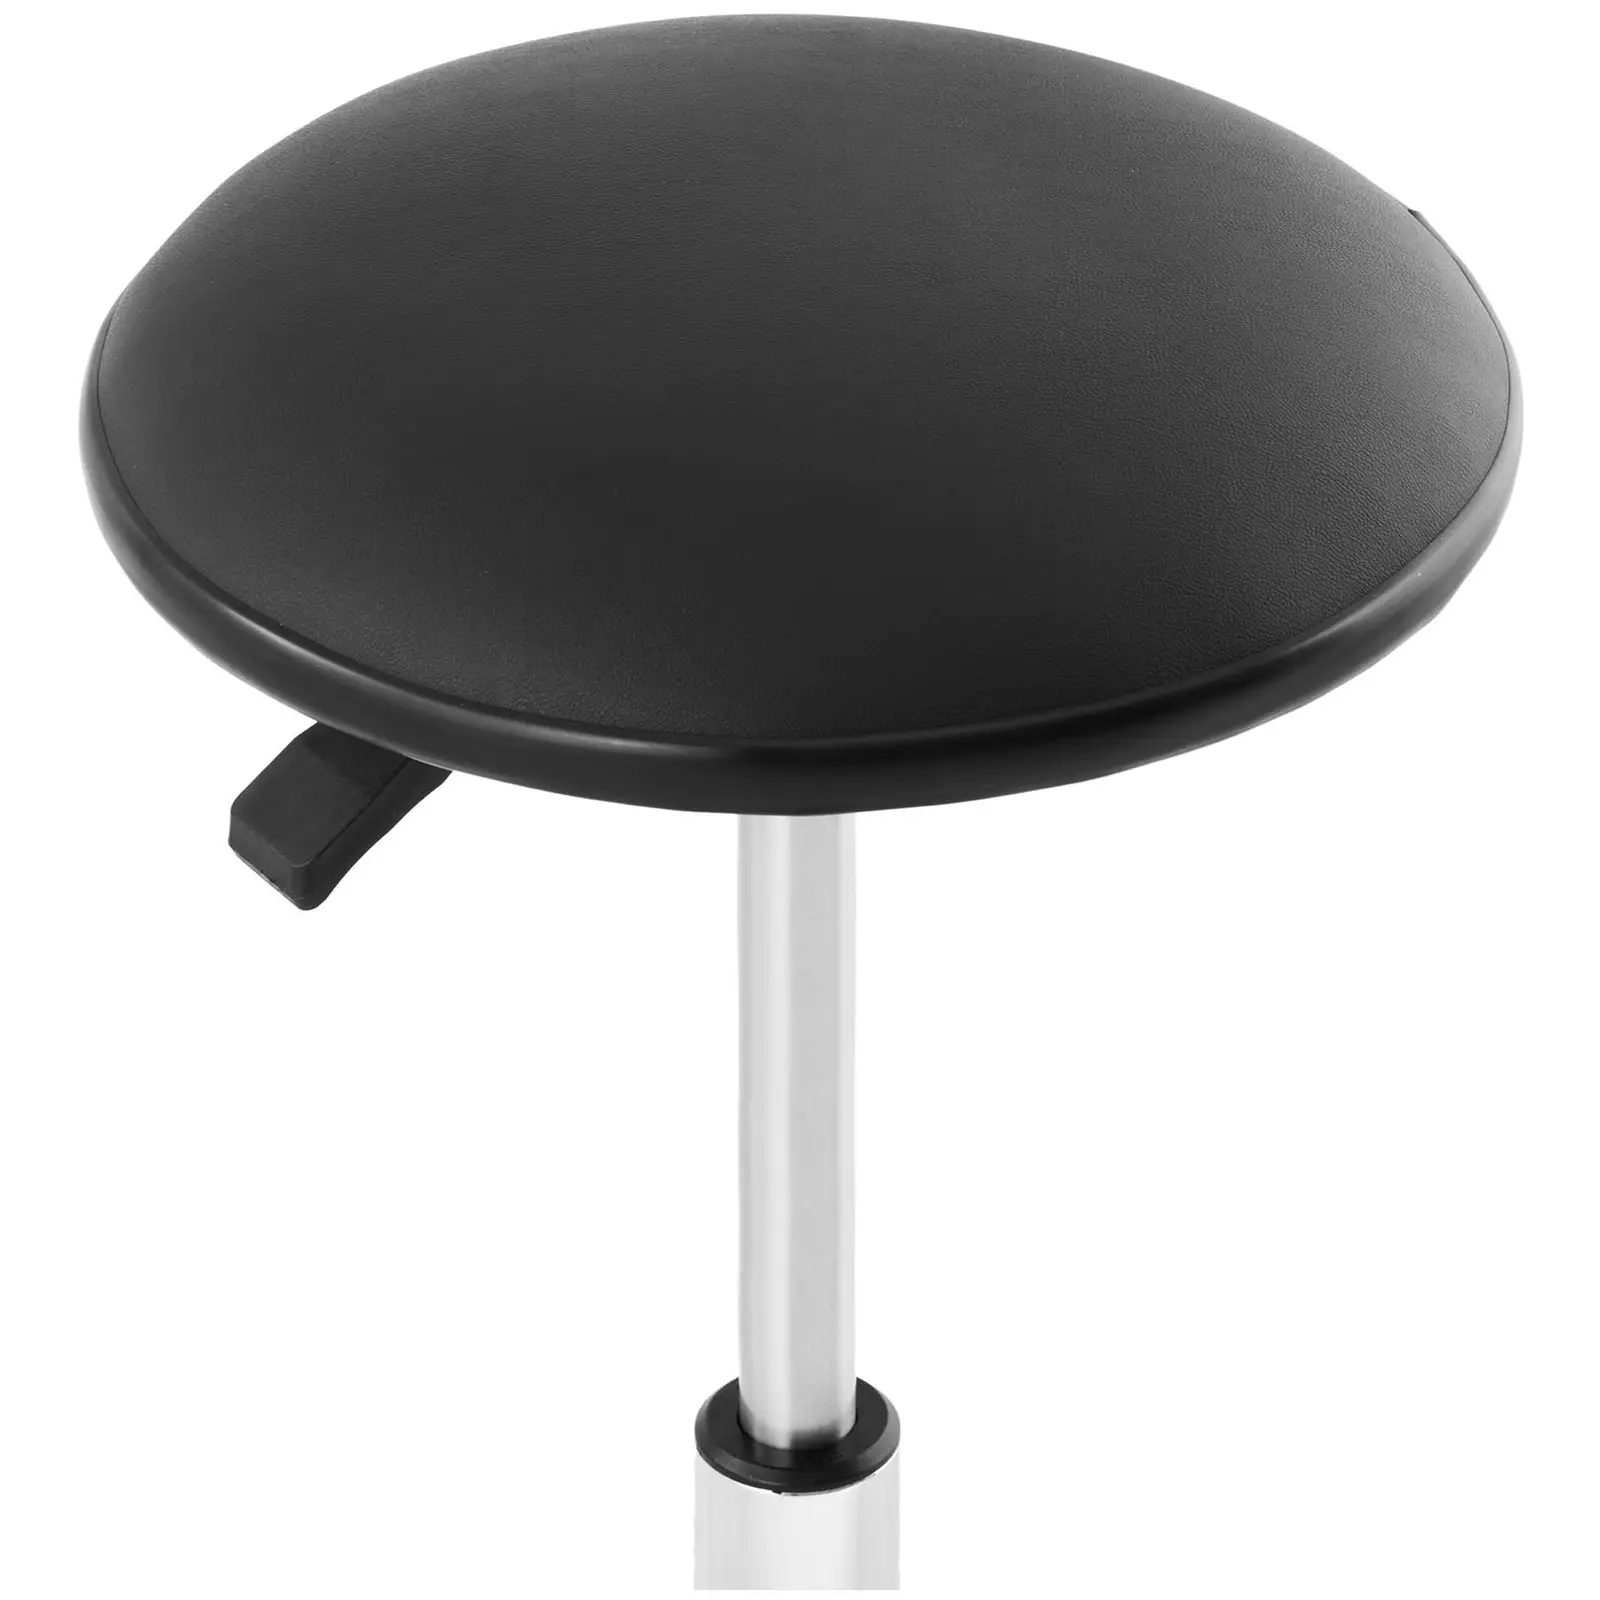 Swivel stool - 120 kg - Black - foot ring - height adjustable from 530 - 800 mm